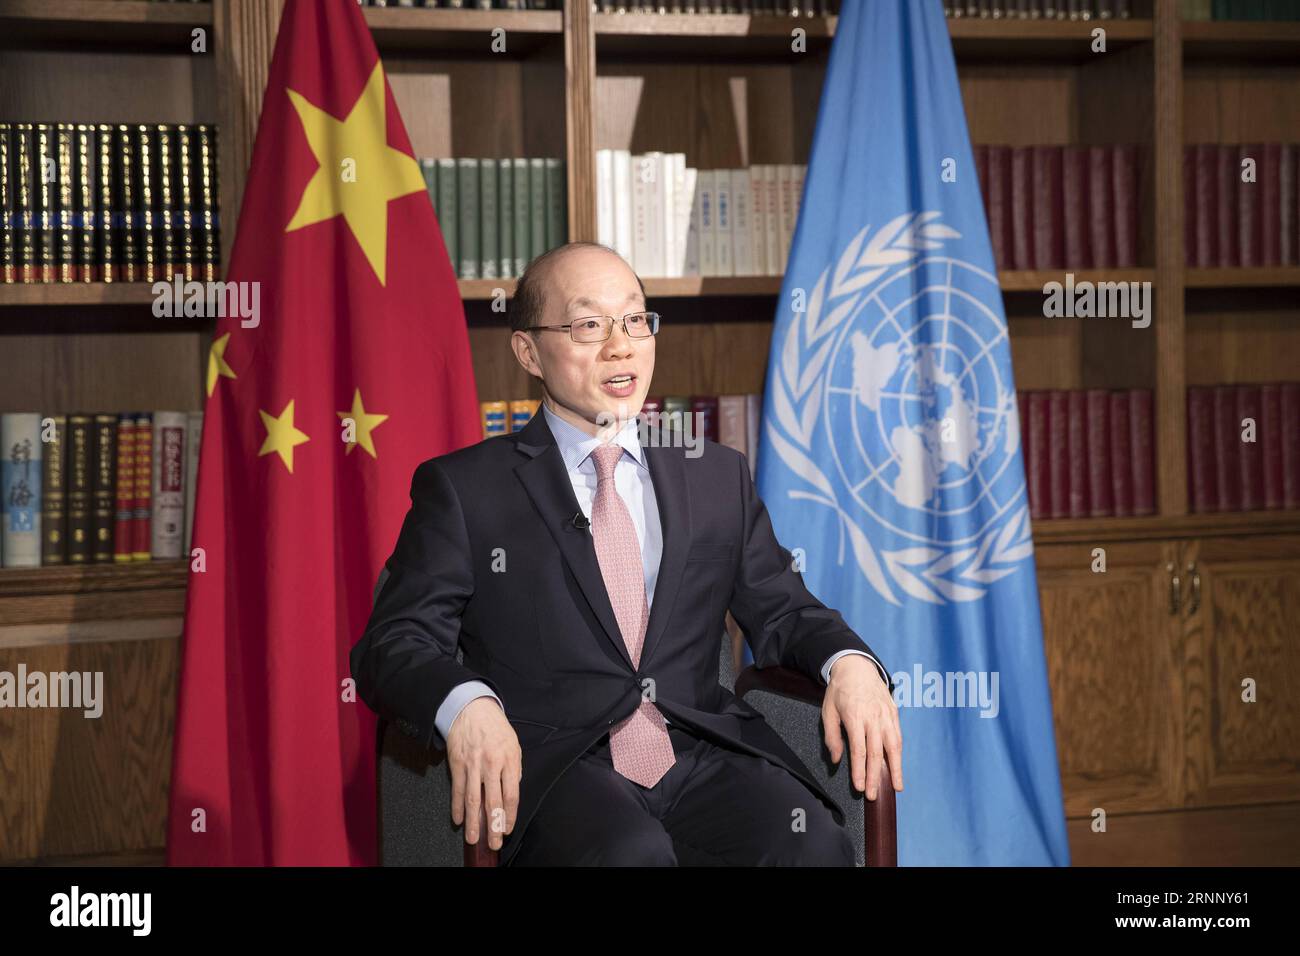 (170801) -- UNITED NATIONS, Aug. 1, 2017 -- Liu Jieyi, China s Permanent Representative to the United Nations, receives an interview with Xinhua in New York, on Aug. 1, 2017. China on July 31 concluded its rotating presidency of the UN Security Council for the month of July. Under the month-long Chinese presidency, the Security Council, which is the most powerful UN body, convened more than 30 meetings, adopted four resolutions and four presidential statements, and issued seven press statements. In July, China succeeded in holding two open debates on enhancing African capacities in the areas o Stock Photo